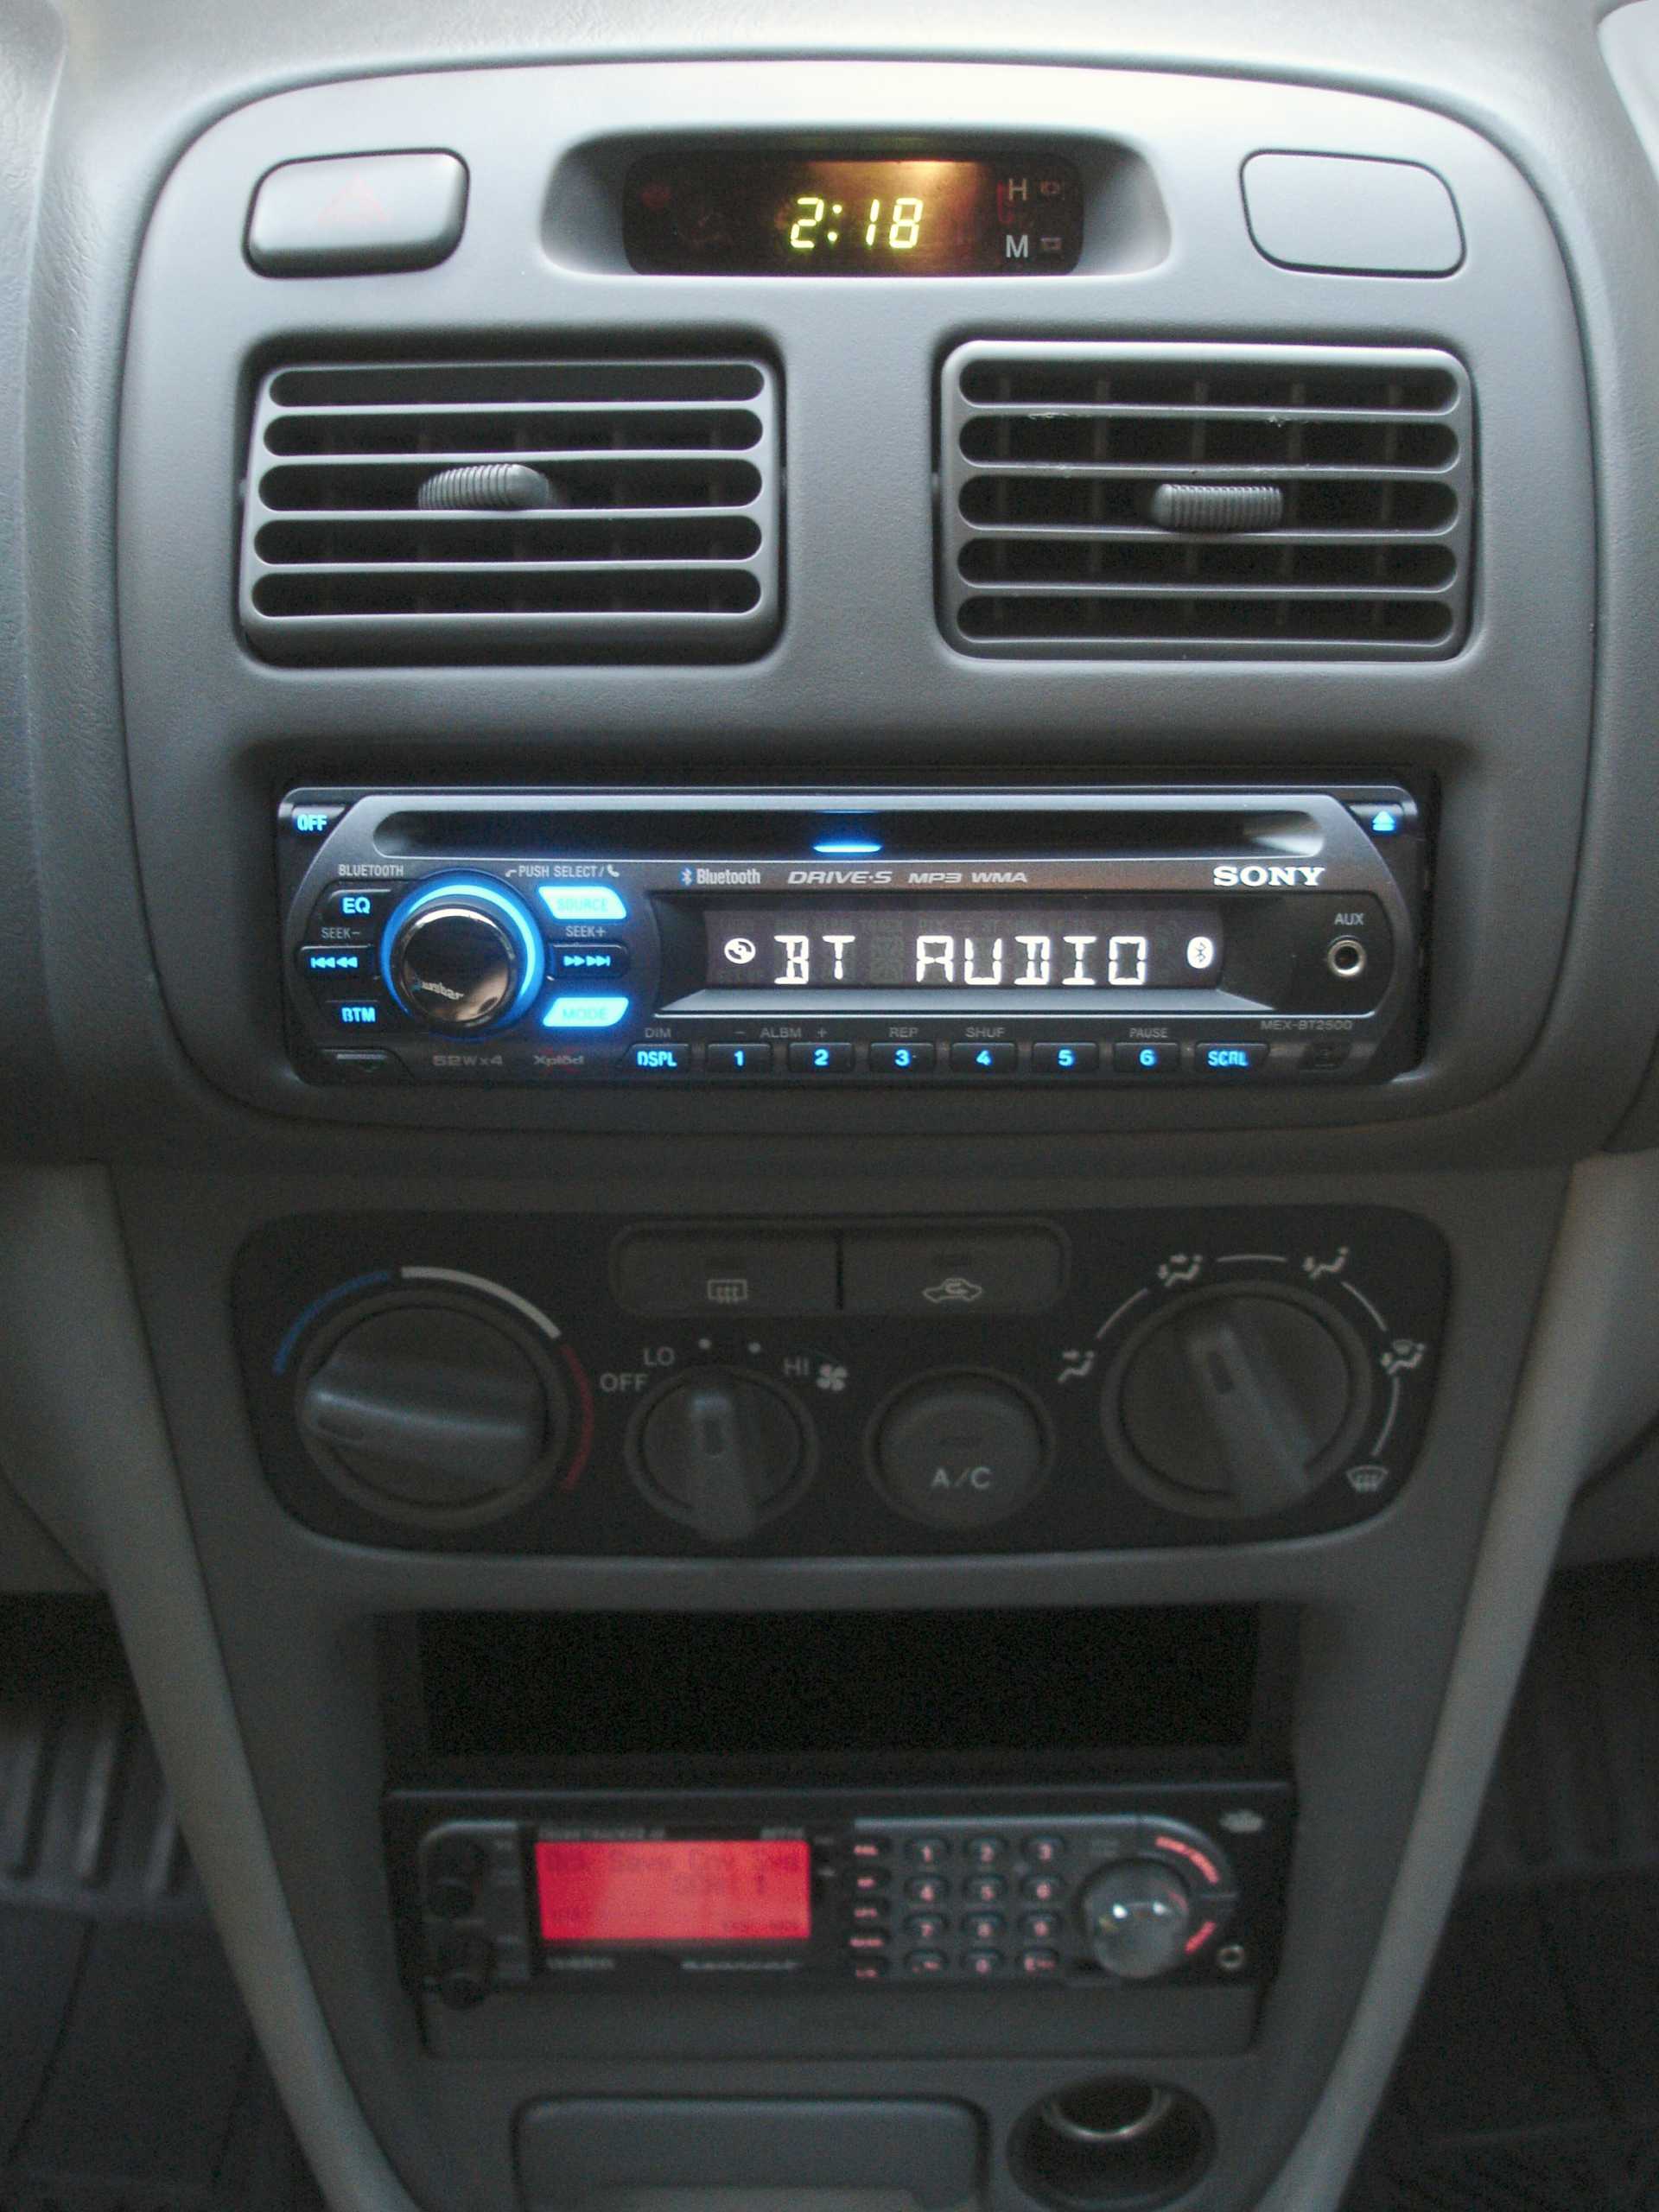 Car_dashboard_with_MEX-BT2500_head_unit_and_BCT-15_radio_scanner_installed_and_illuminated